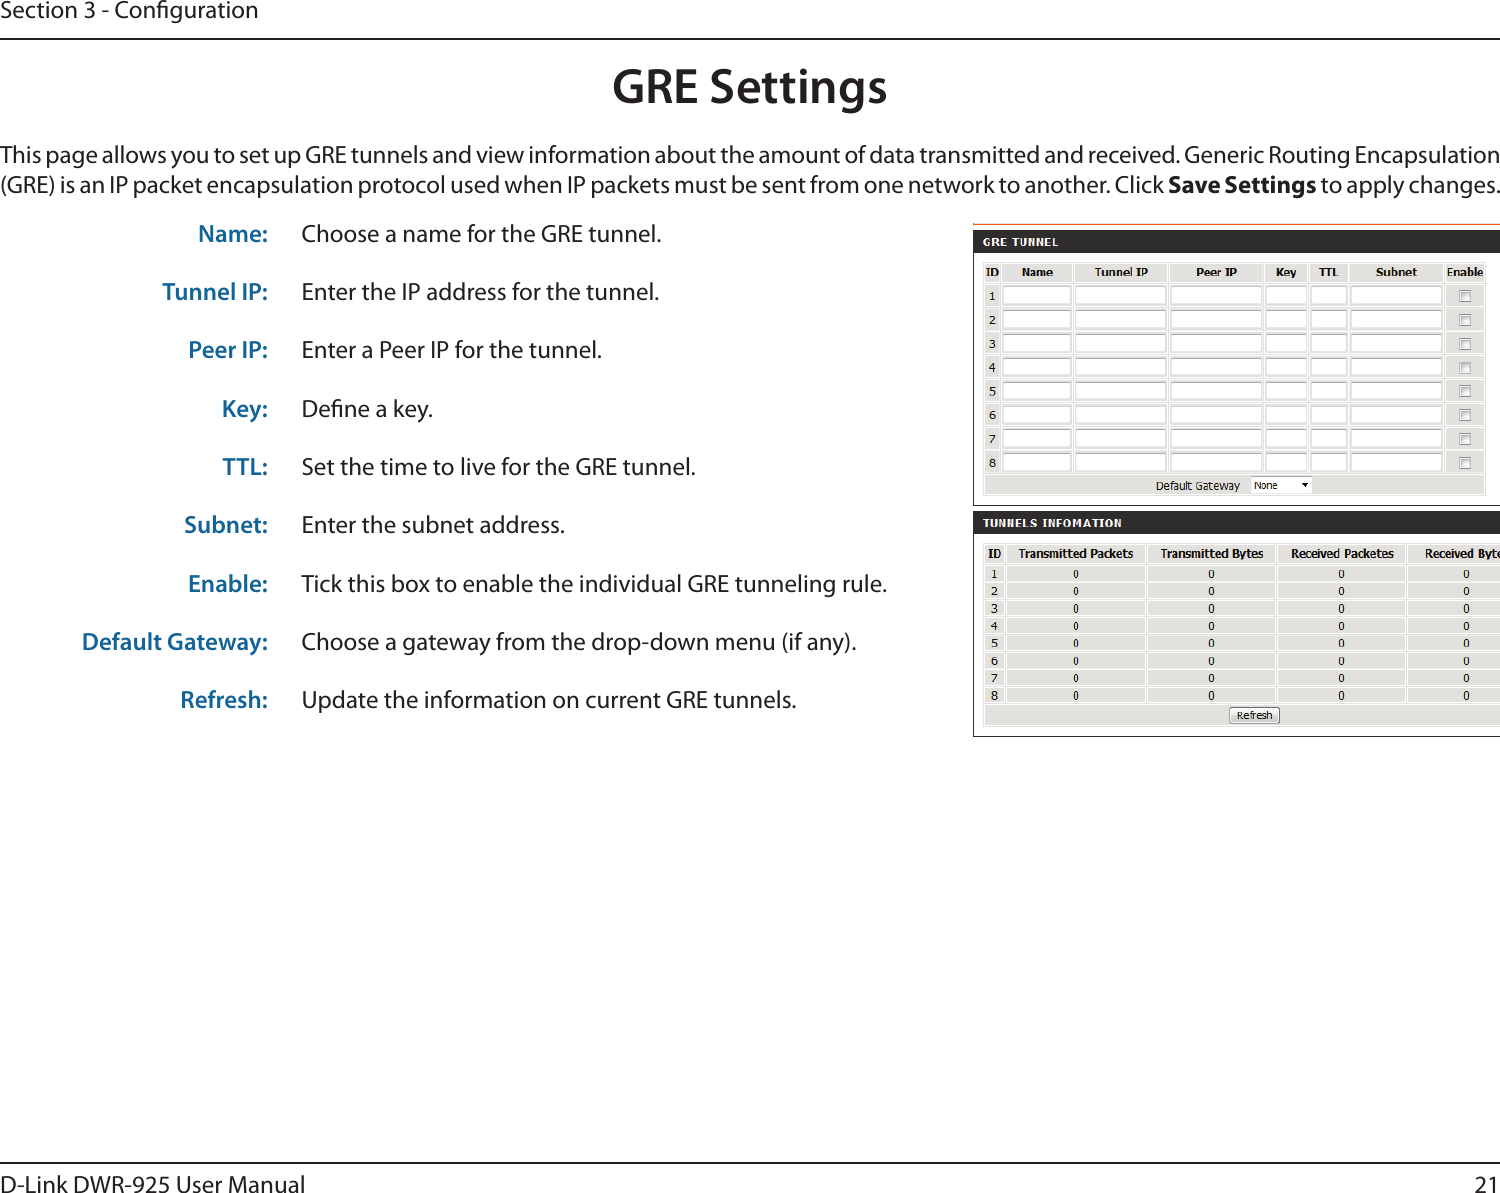 21D-Link DWR-925 User ManualSection 3 - CongurationGRE SettingsThis page allows you to set up GRE tunnels and view information about the amount of data transmitted and received. Generic Routing Encapsulation (GRE) is an IP packet encapsulation protocol used when IP packets must be sent from one network to another. Click Save Settings to apply changes.Choose a name for the GRE tunnel.Enter the IP address for the tunnel.Enter a Peer IP for the tunnel.Dene a key.Set the time to live for the GRE tunnel.Enter the subnet address.Tick this box to enable the individual GRE tunneling rule.Choose a gateway from the drop-down menu (if any).Update the information on current GRE tunnels.Name:Tunnel IP:Peer IP:Key:TTL:Subnet:Enable:Default Gateway:Refresh: